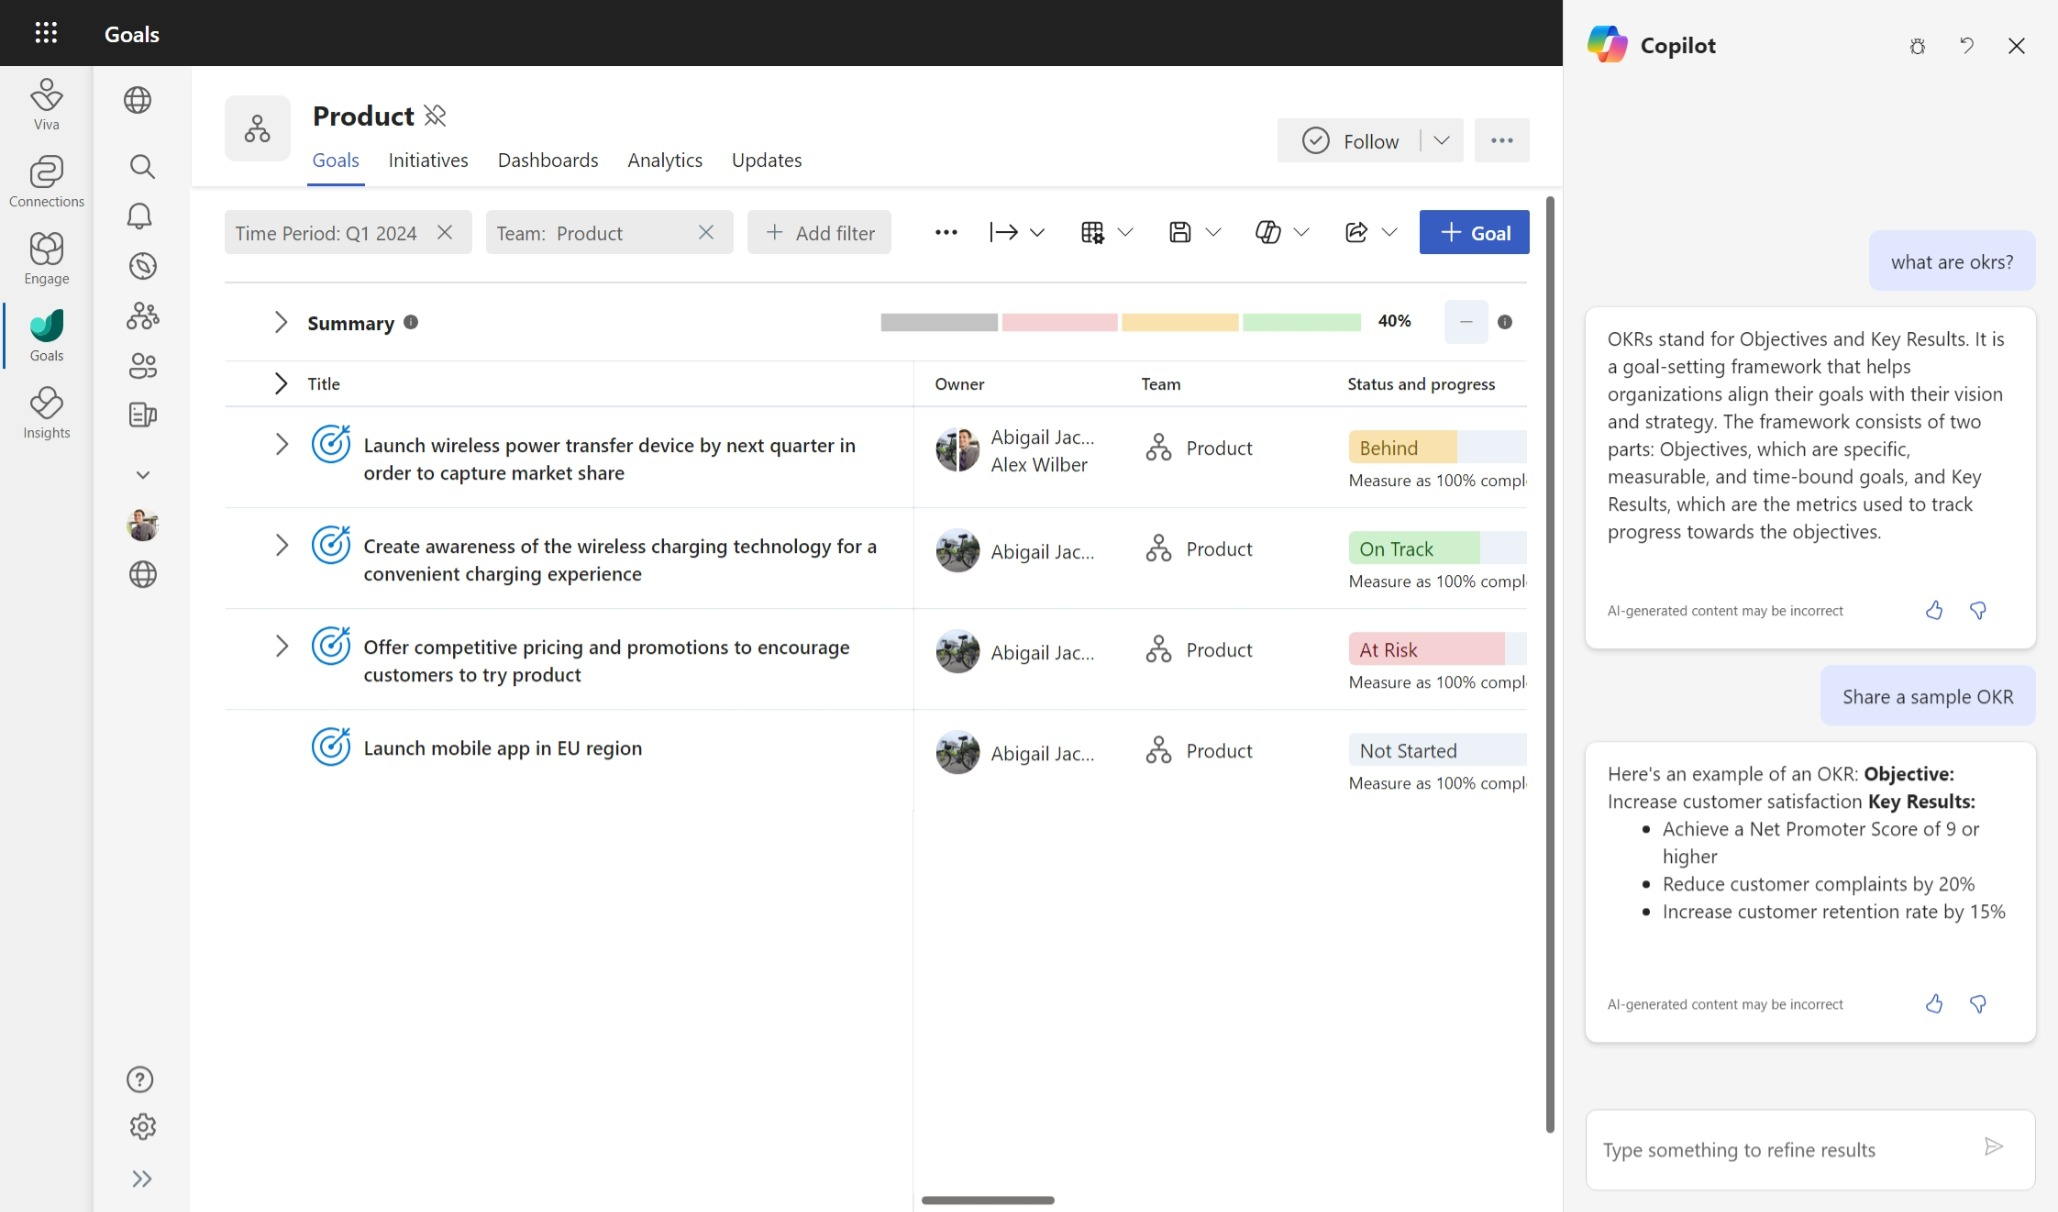 Screenshot that shows a view of a product team's OKRs, with the user asking Copilot questions about OKR methodology on the right side.